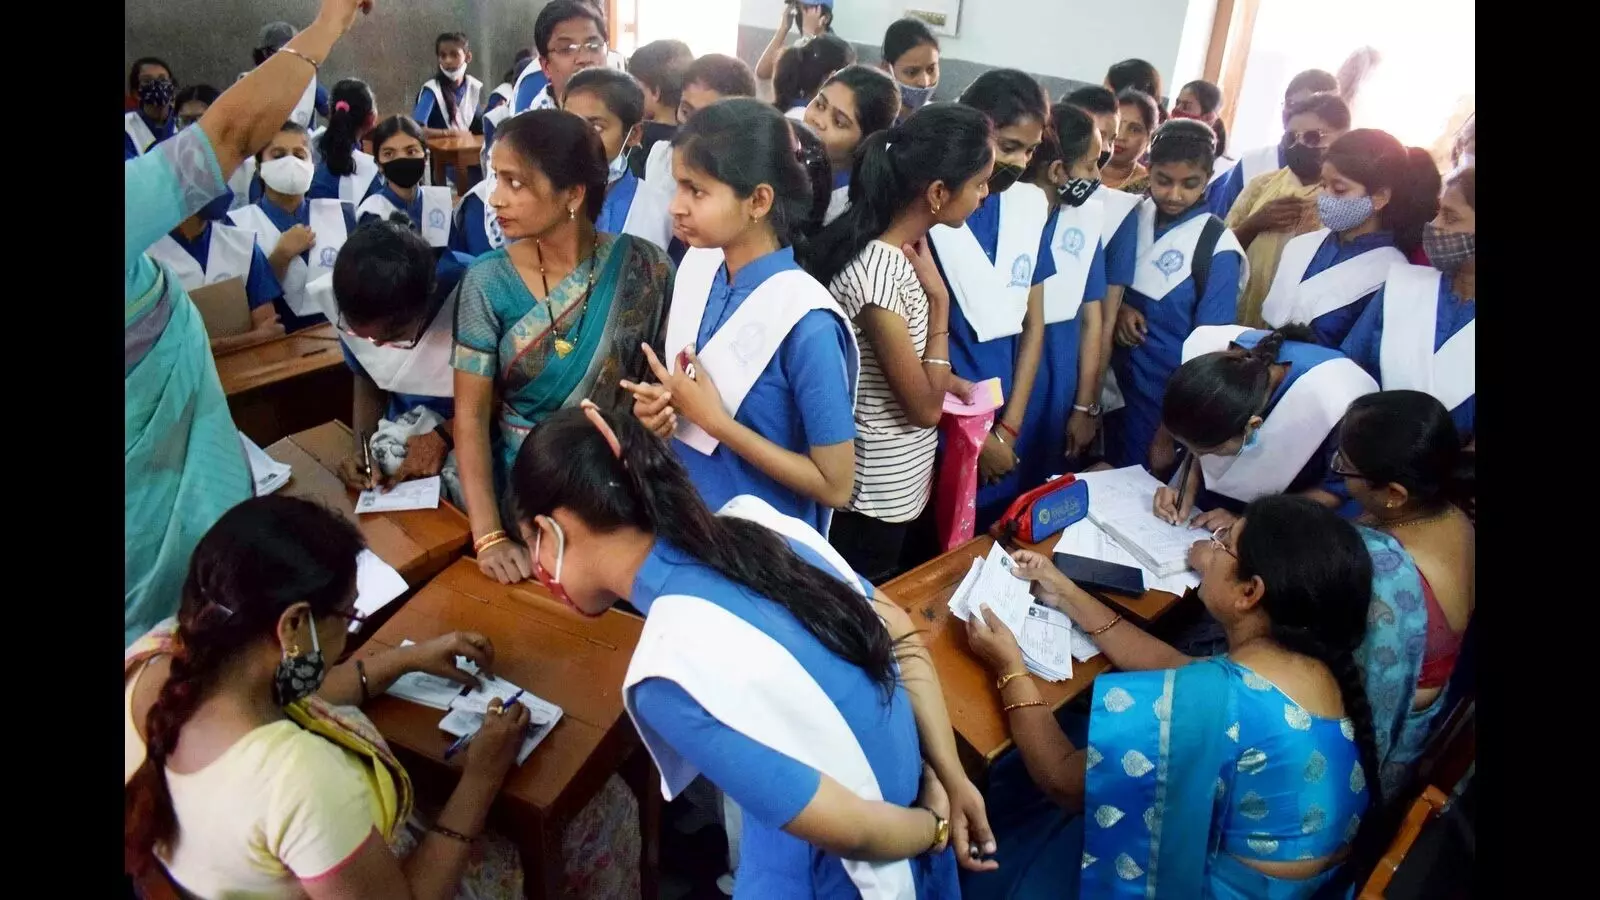 UP Board puts 253 schools on ineligible exam centres list